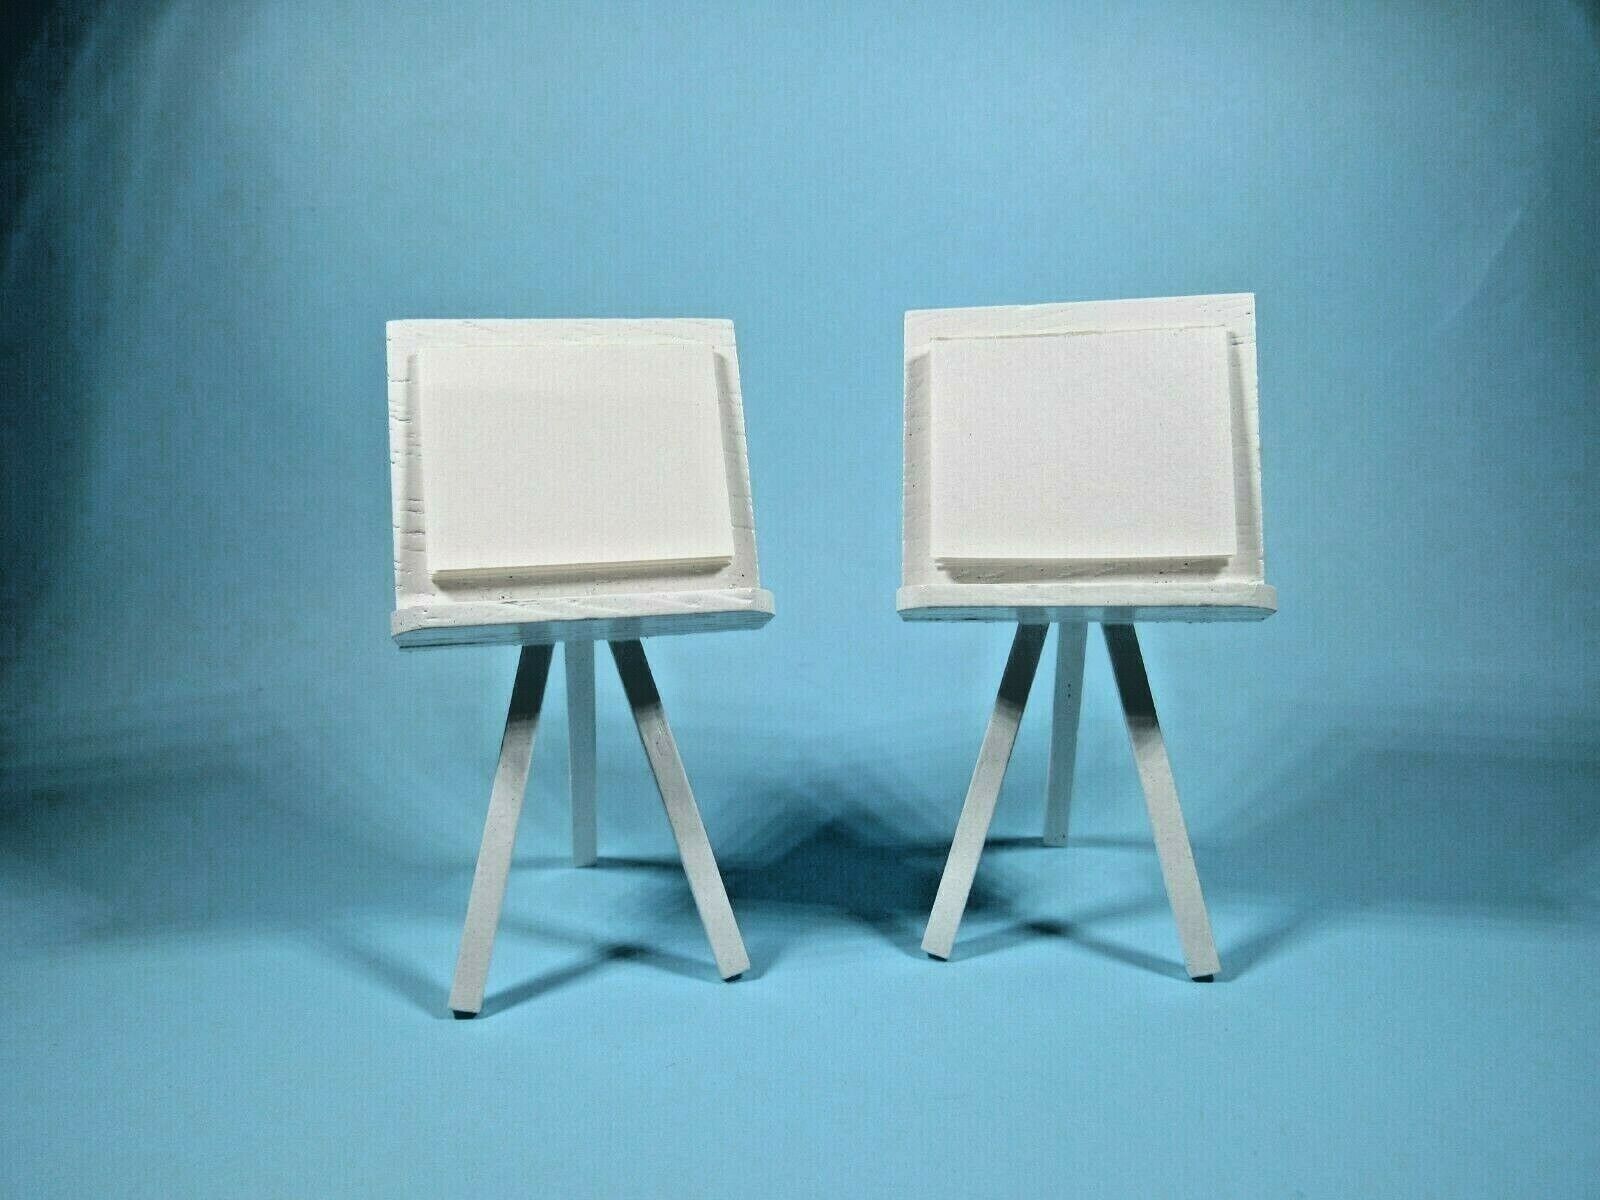 Dollhouse Miniature Painting/ Art Easel with Pad or Display White Wood set of 2 Unbranded Aztec Miniatures Does Not Apply